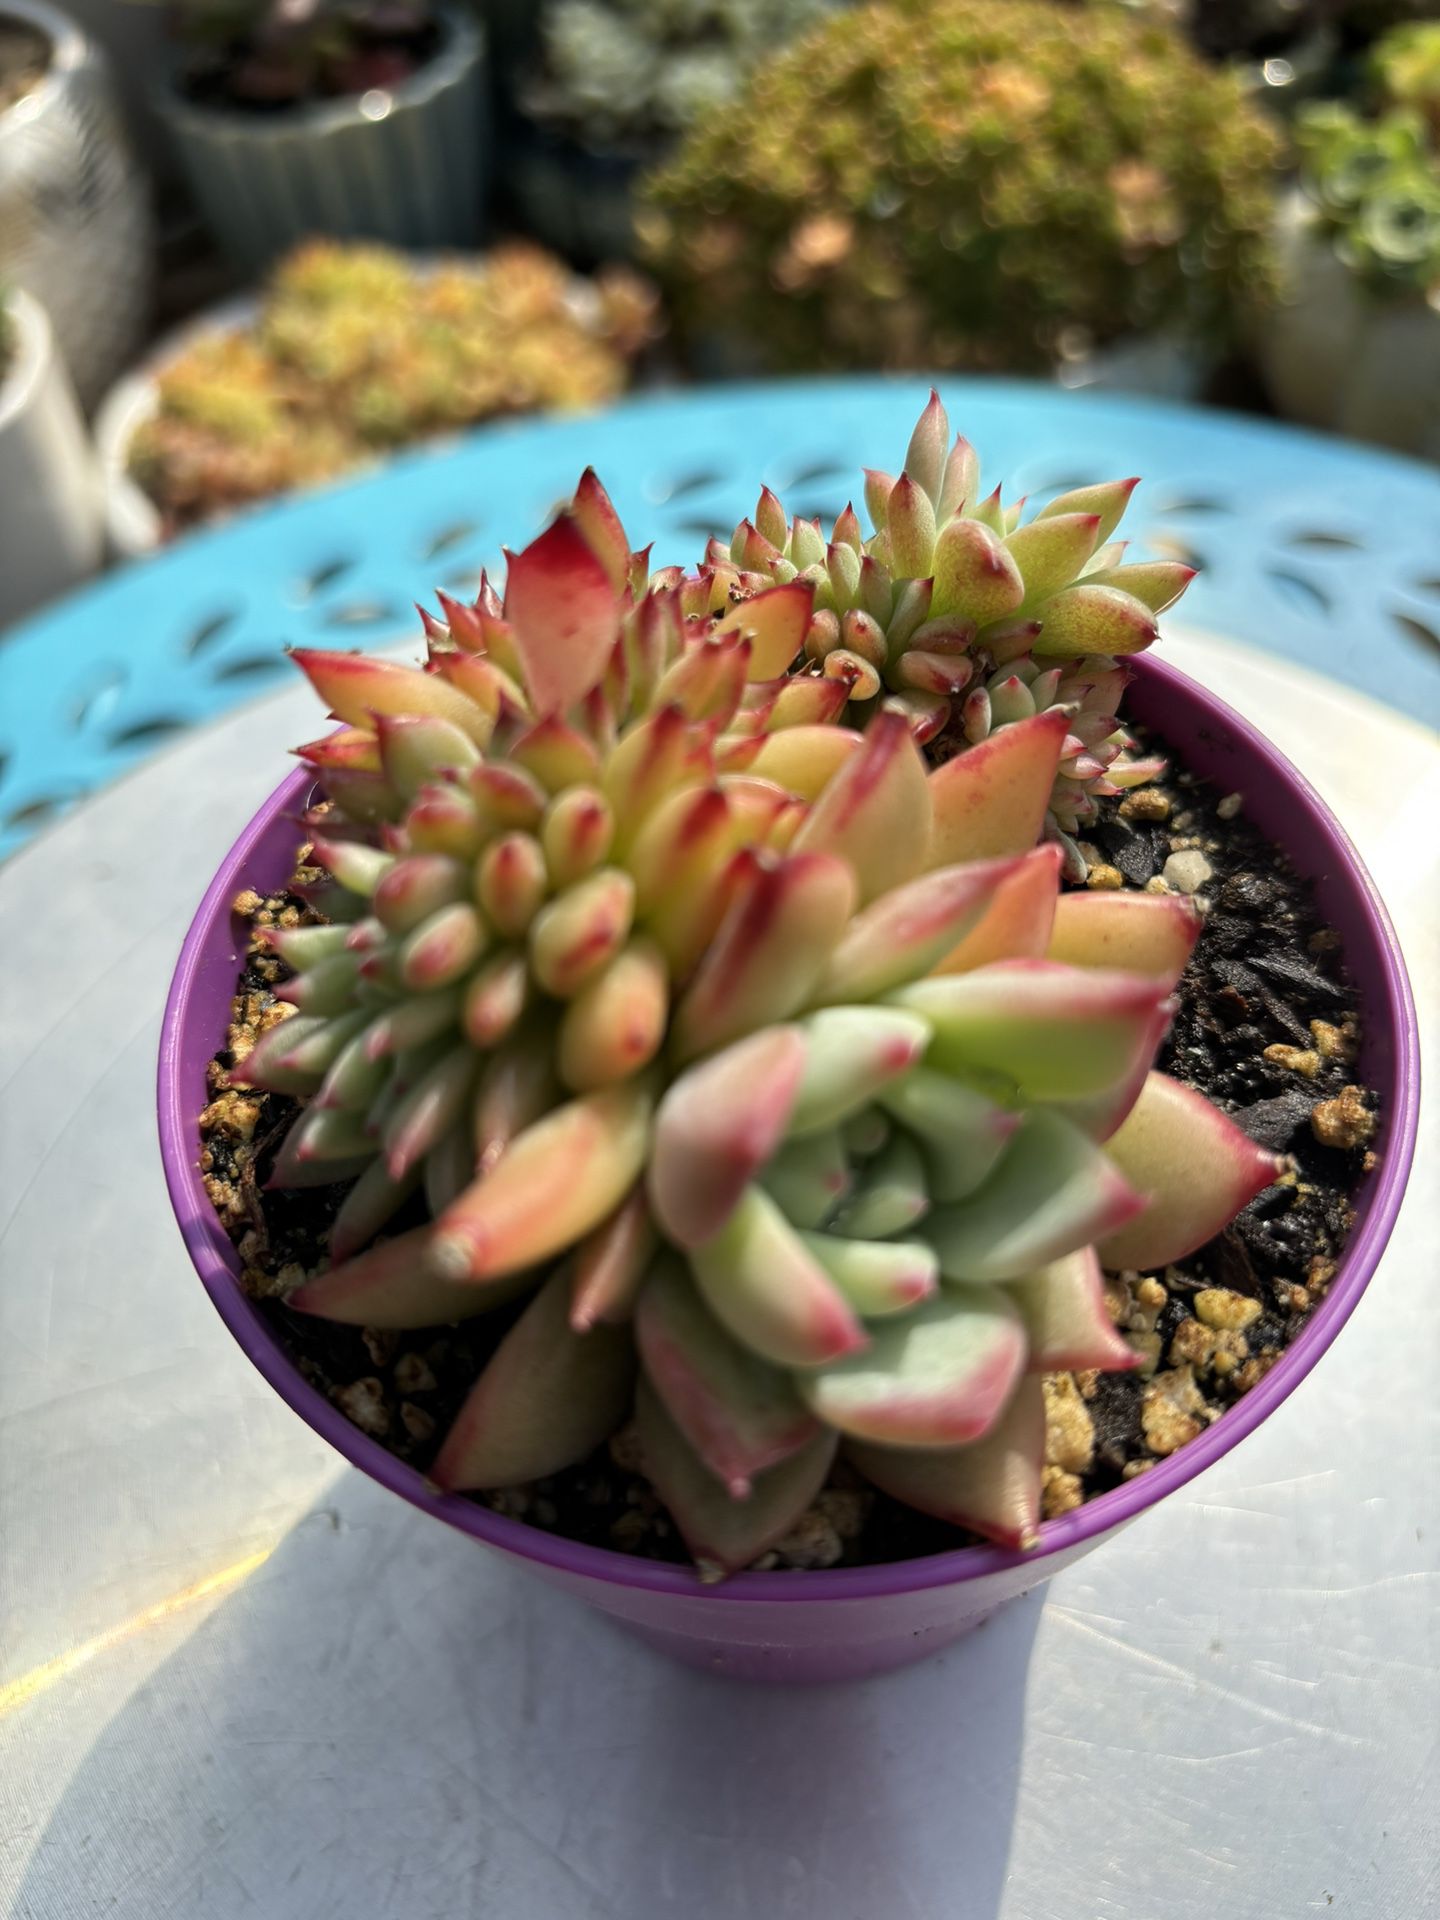 Crested Agavoides Succulent Import